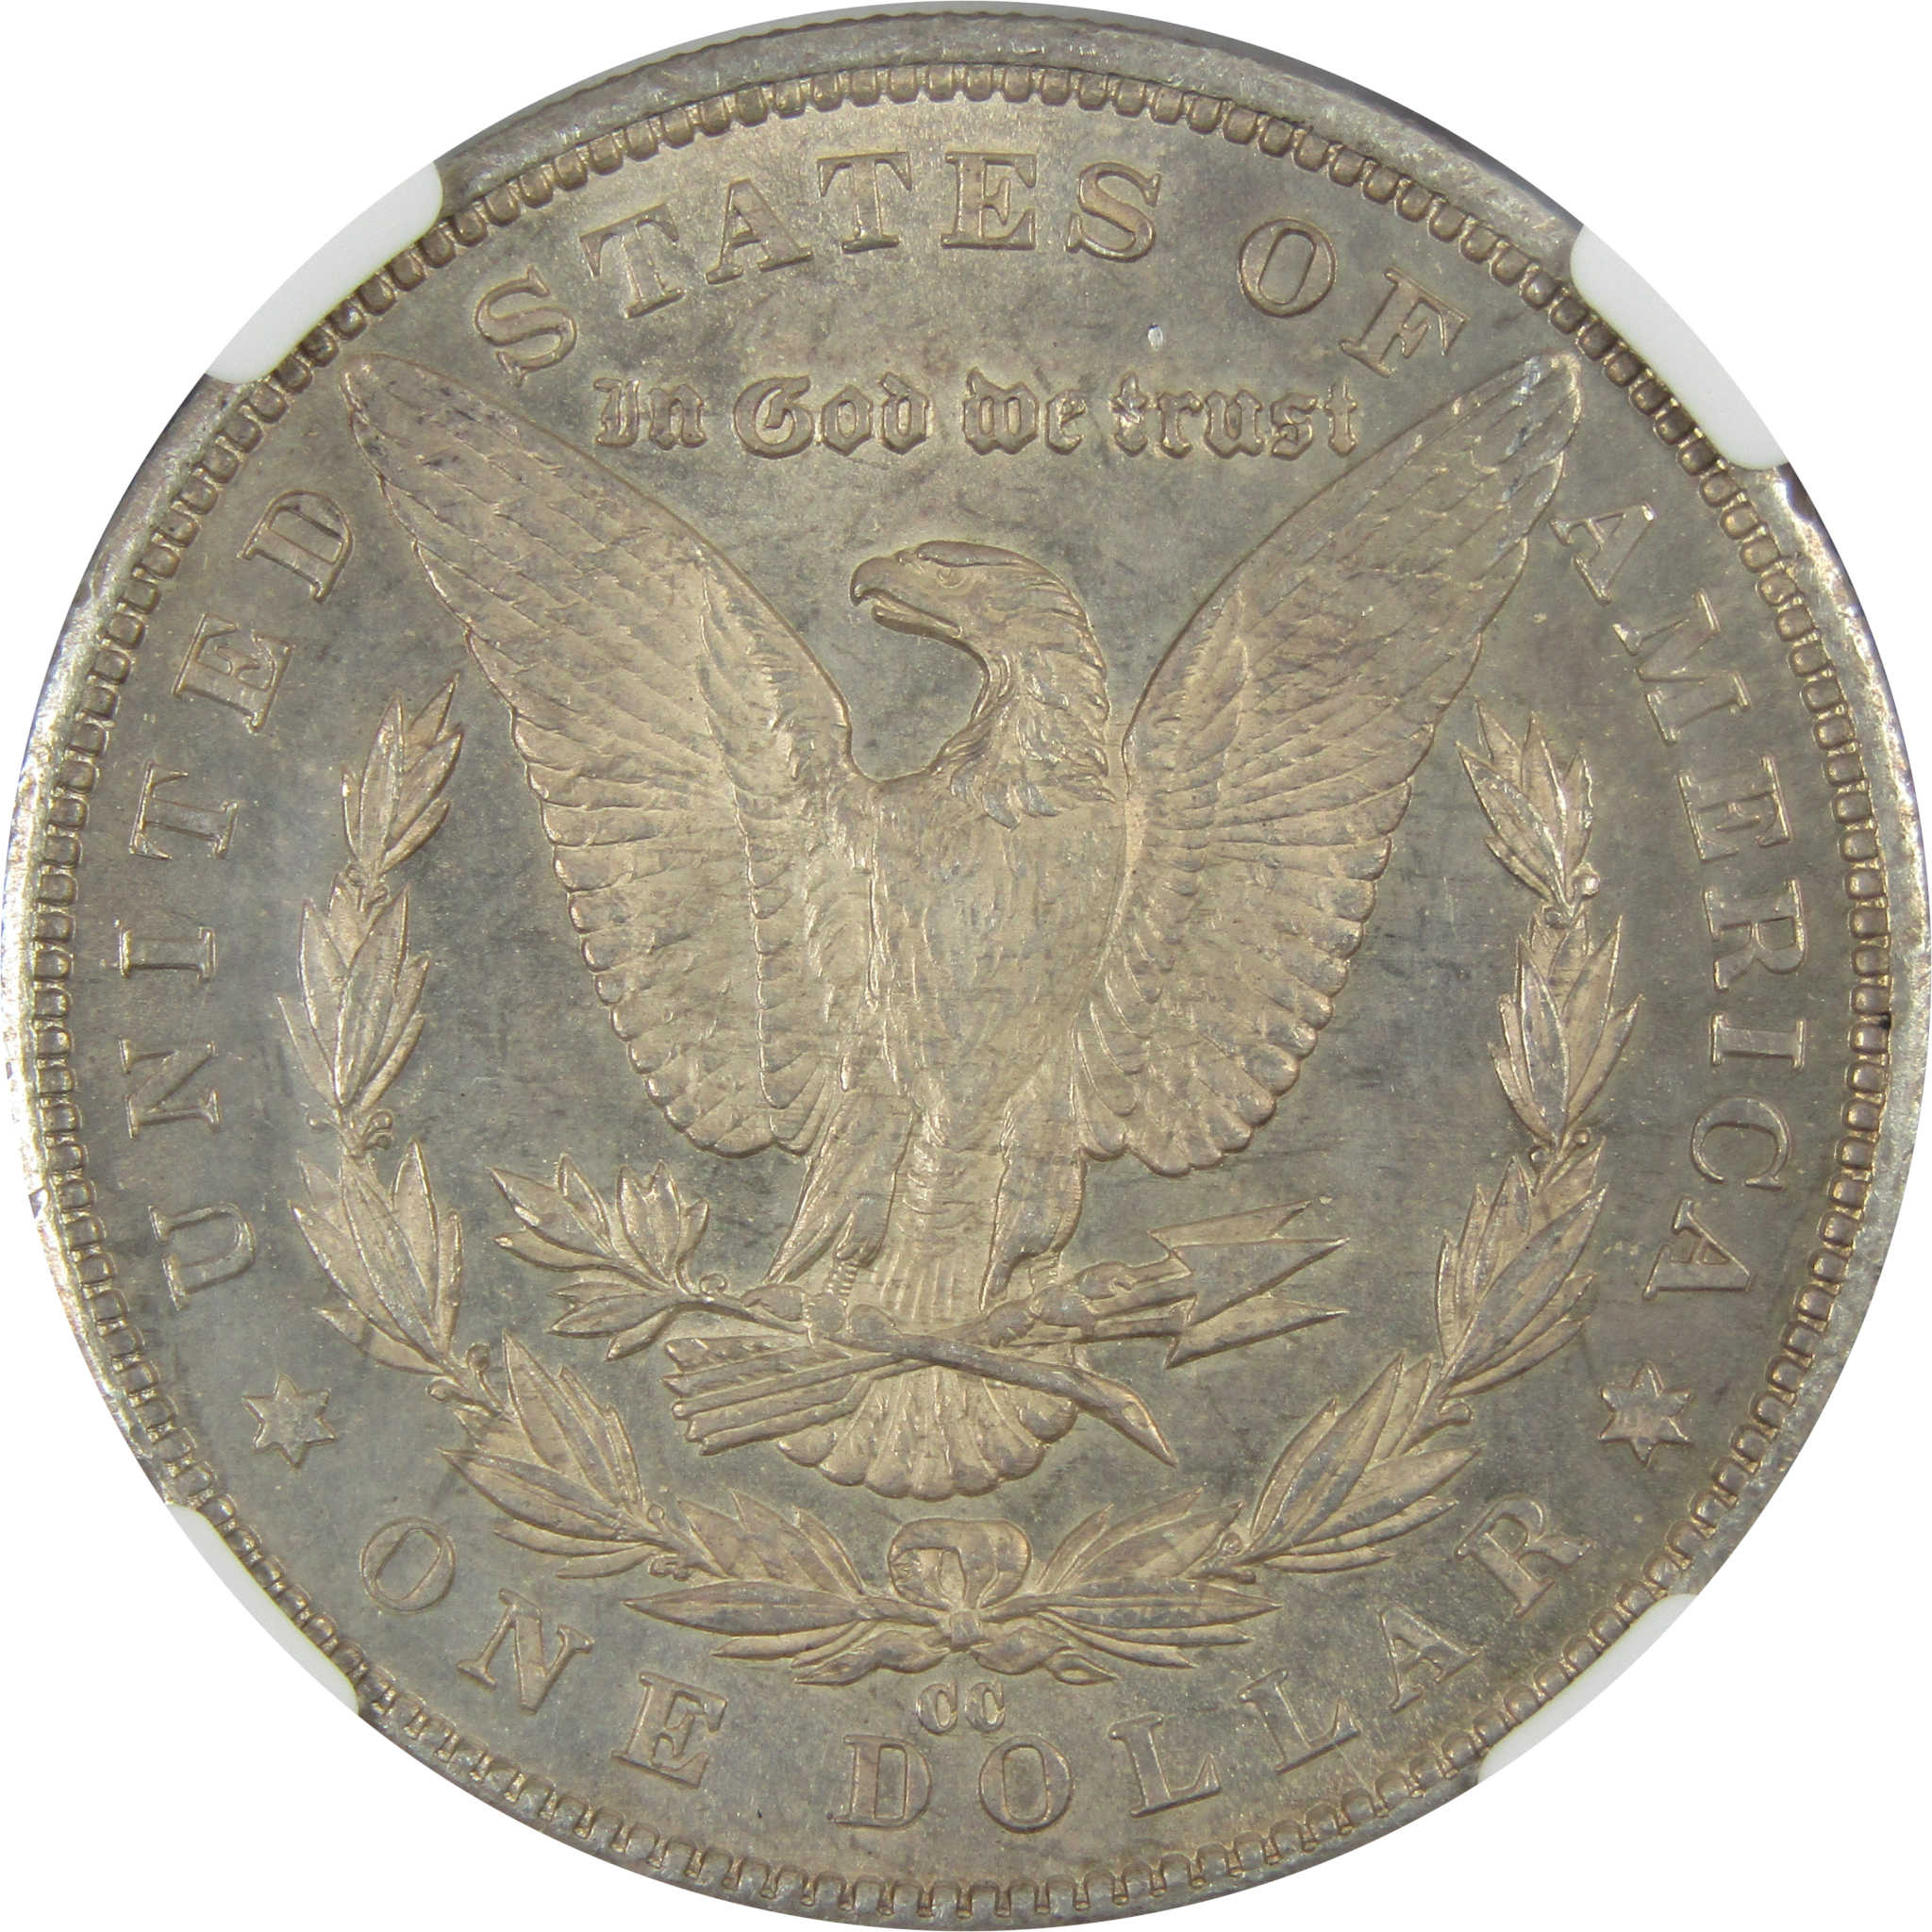 1892 CC Morgan Dollar MS 60 Details NGC 90% Silver $1 Unc SKU:I7422 - Morgan coin - Morgan silver dollar - Morgan silver dollar for sale - Profile Coins &amp; Collectibles